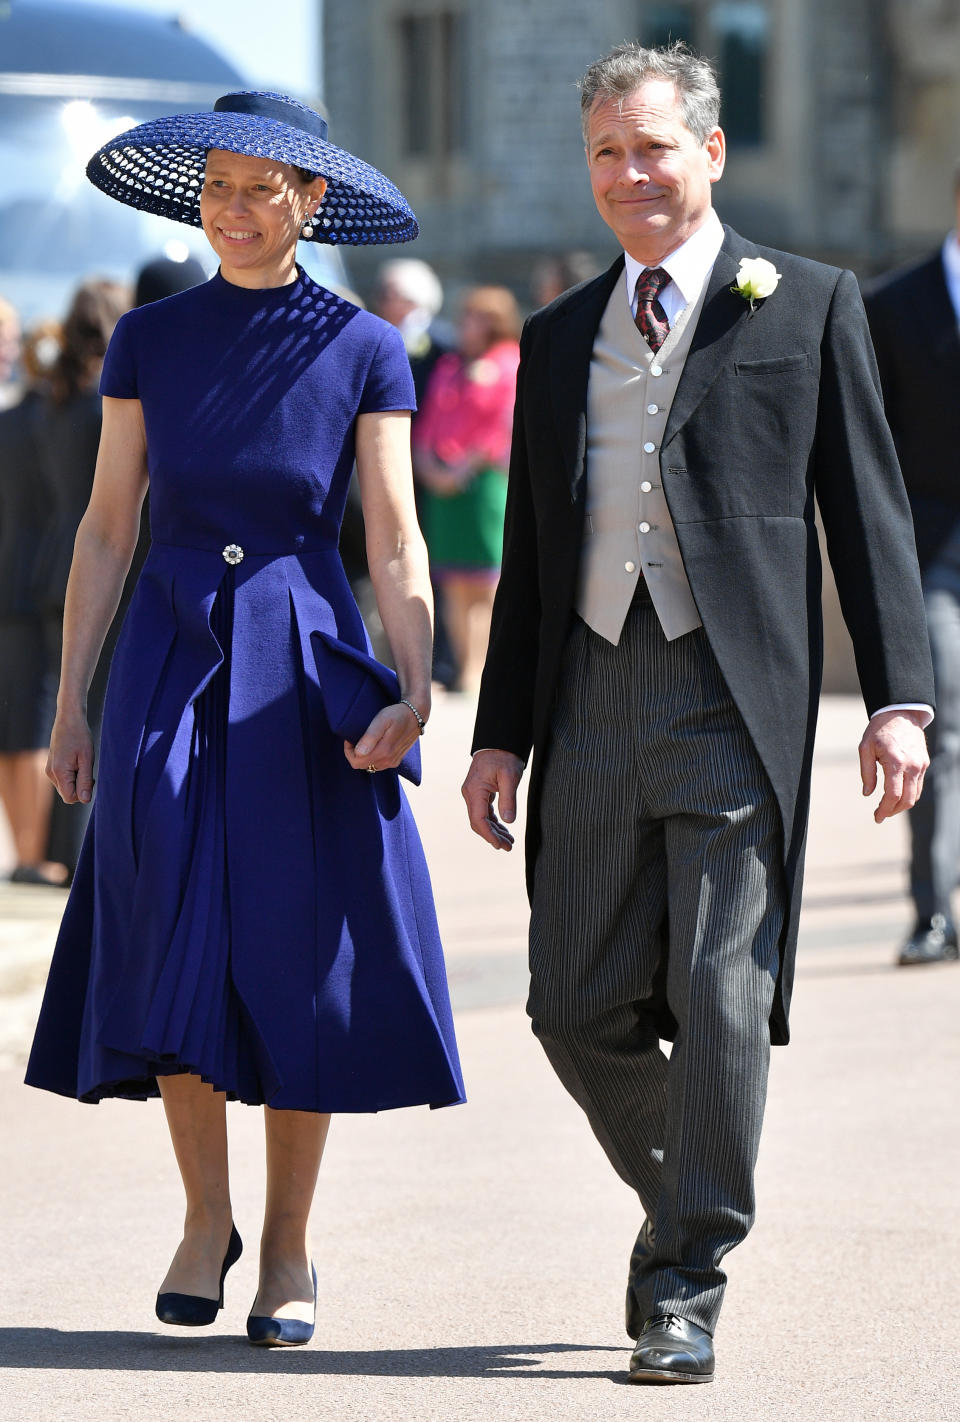 WINDSOR, UNITED KINGDOM - MAY 19: (EMBARGOED FOR PUBLICATION IN UK NEWSPAPERS UNTIL 24 HOURS AFTER CREATE DATE AND TIME) Lady Sarah Chatto and Daniel Chatto attend the wedding of Prince Harry to Ms Meghan Markle at St George's Chapel, Windsor Castle on May 19, 2018 in Windsor, England. Prince Henry Charles Albert David of Wales marries Ms. Meghan Markle in a service at St George's Chapel inside the grounds of Windsor Castle. Among the guests were 2200 members of the public, the royal family and Ms. Markle's Mother Doria Ragland. (Photo by Pool/Max Mumby/Getty Images)